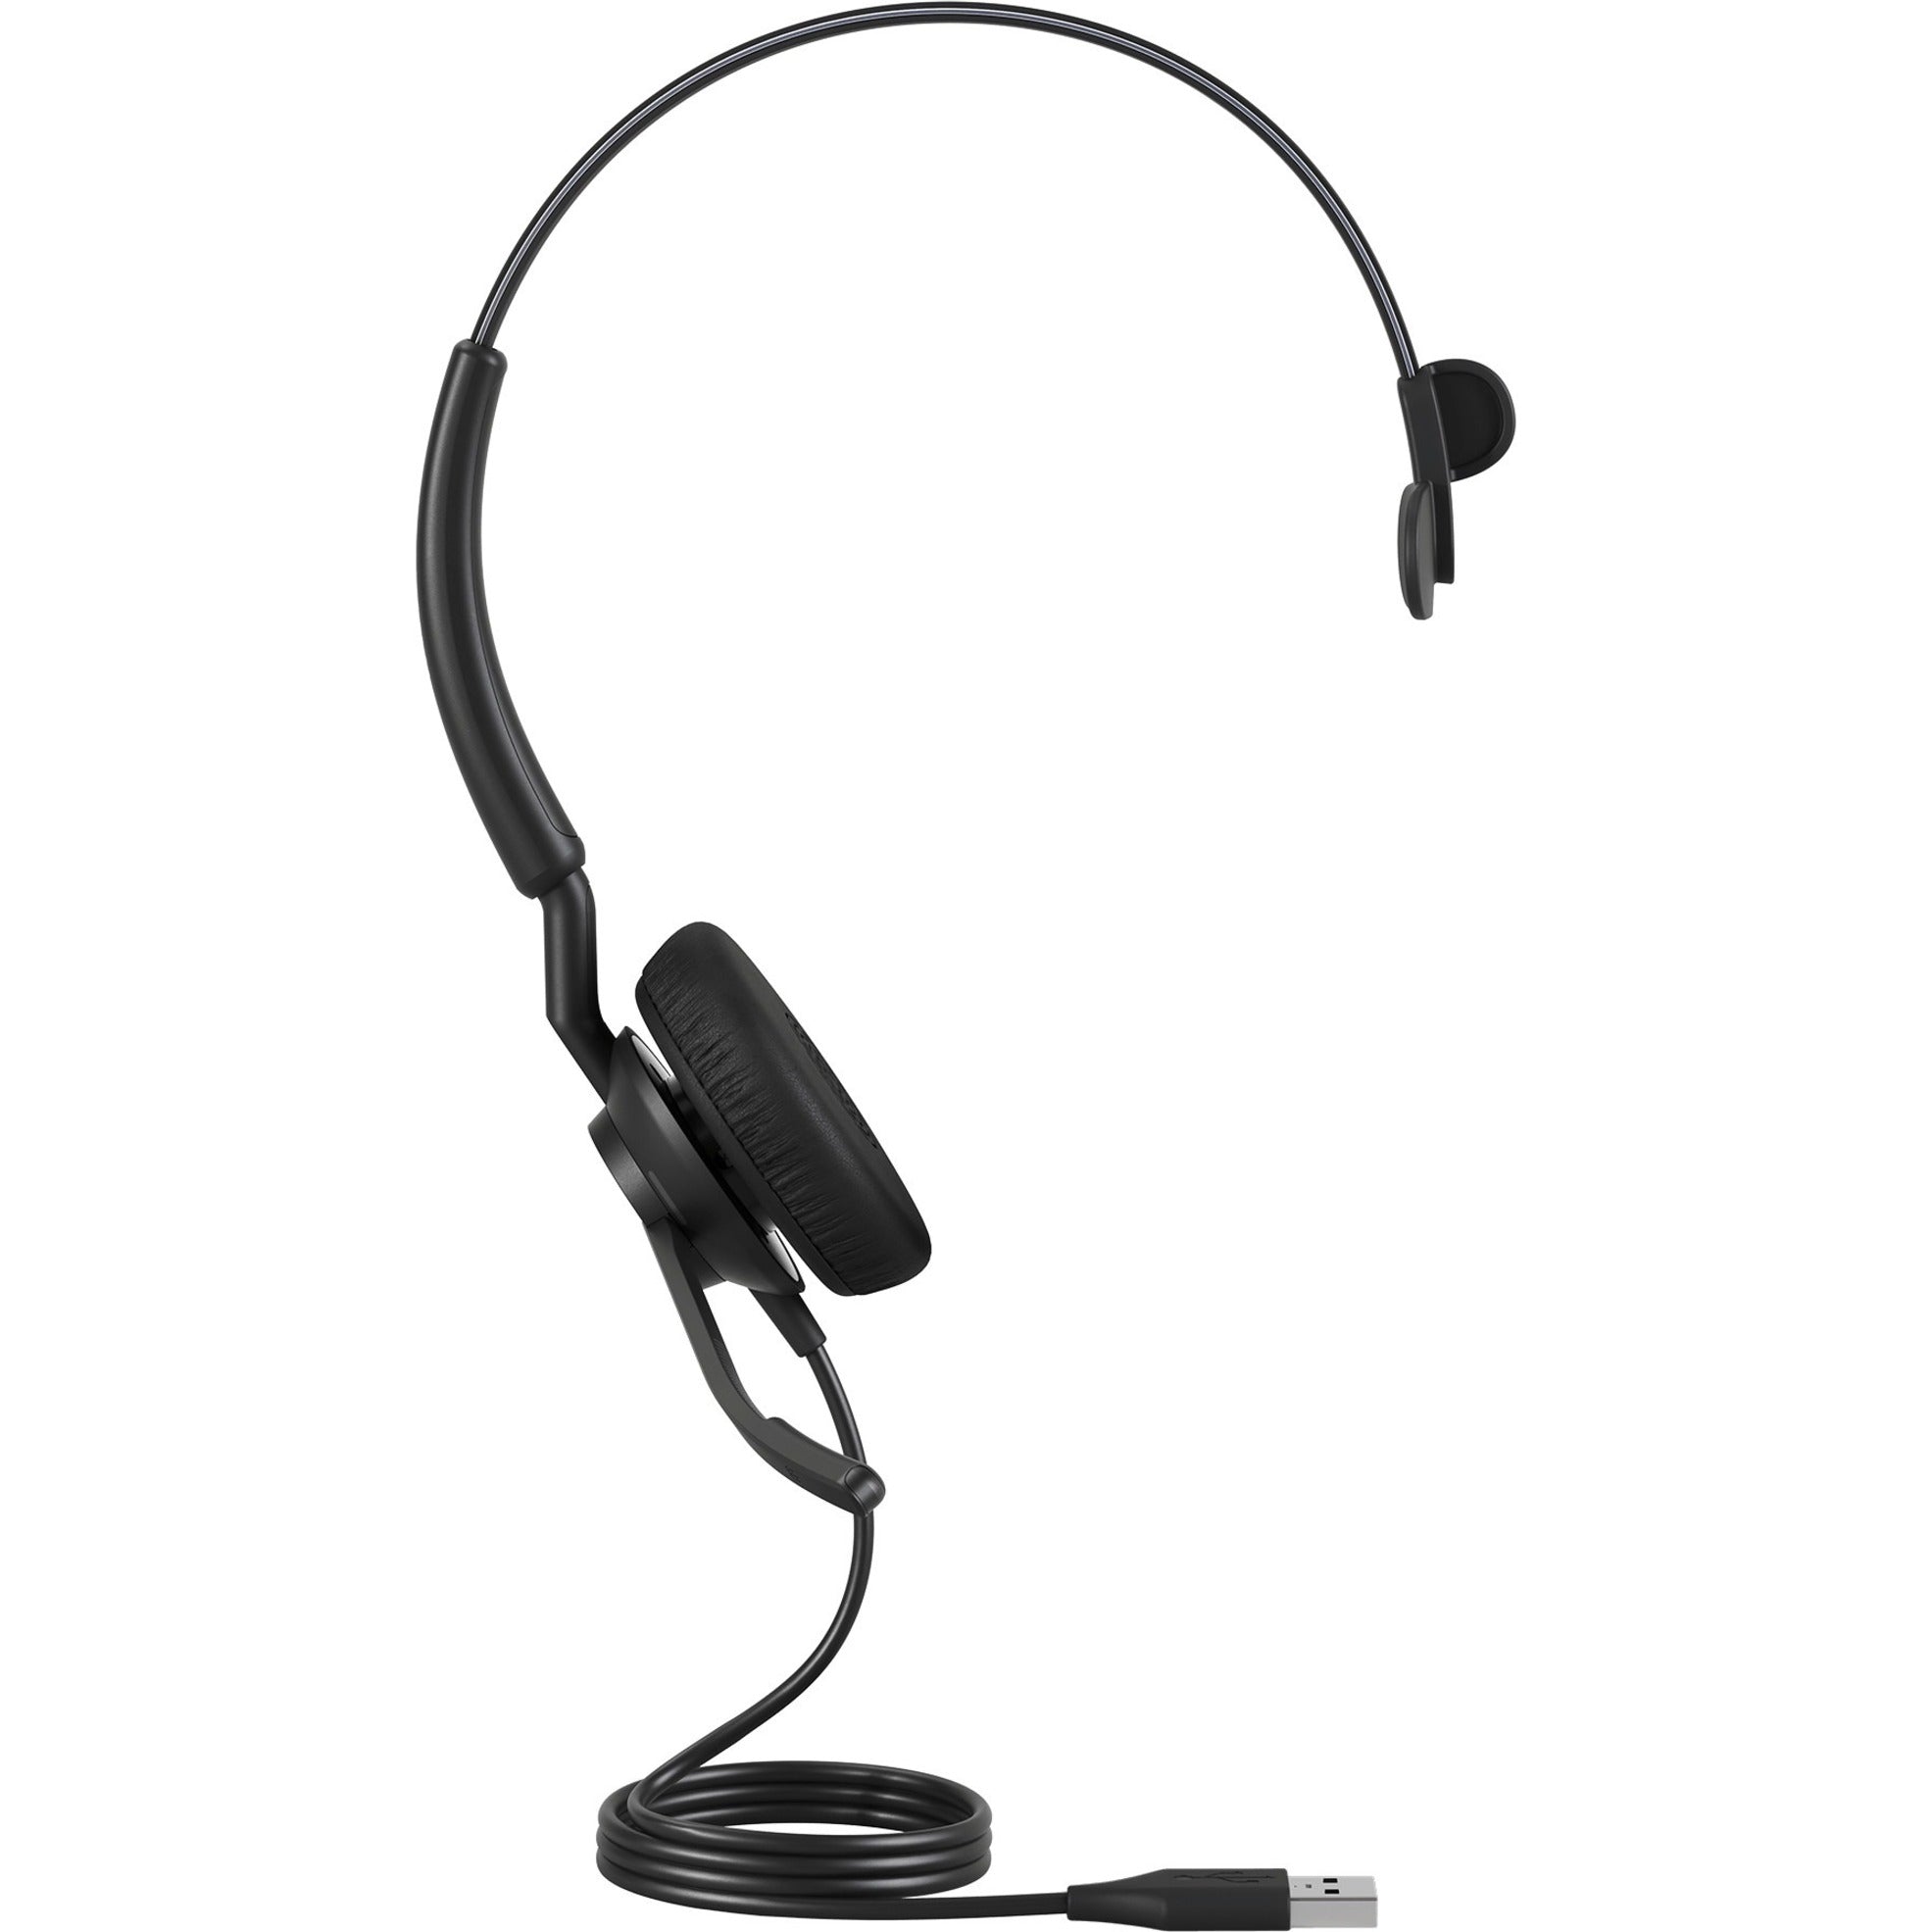 Jabra 4093-410-279 ENGAGE 40 Headset, Over-the-head USB Type A Wired Mono Headset with Noise Isolation, Comfortable Design, and 3-Year Warranty